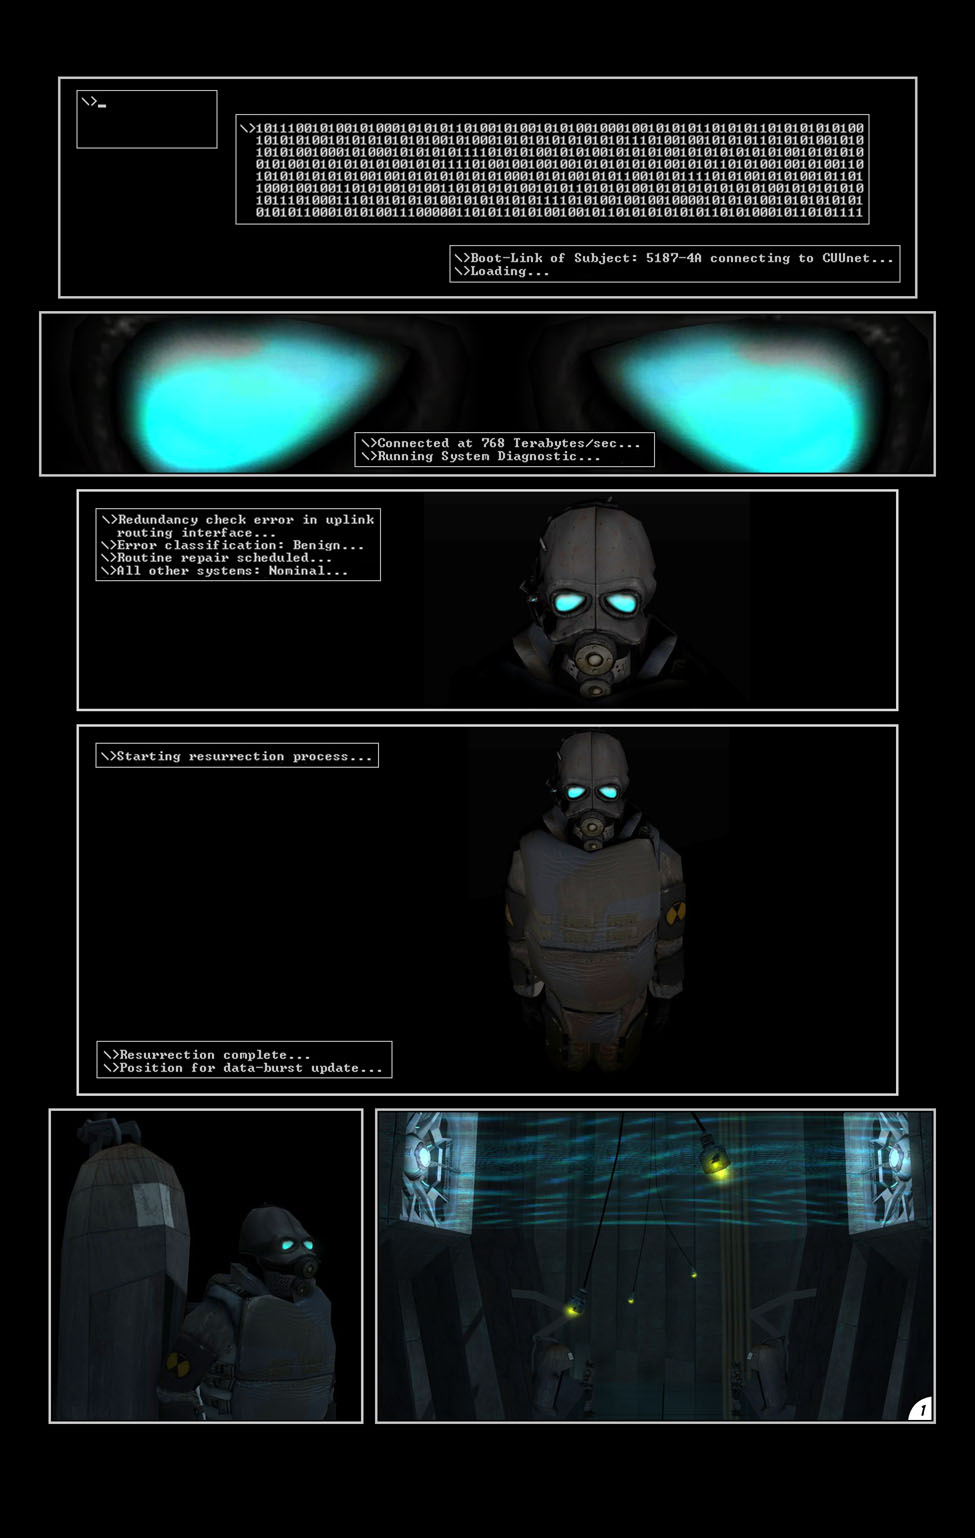 The comic opens with a view of strings of code running. Cut to two eye lenses in the darkness of a Combine transhuman soldier. The code running describes the resurrection of the soldier.